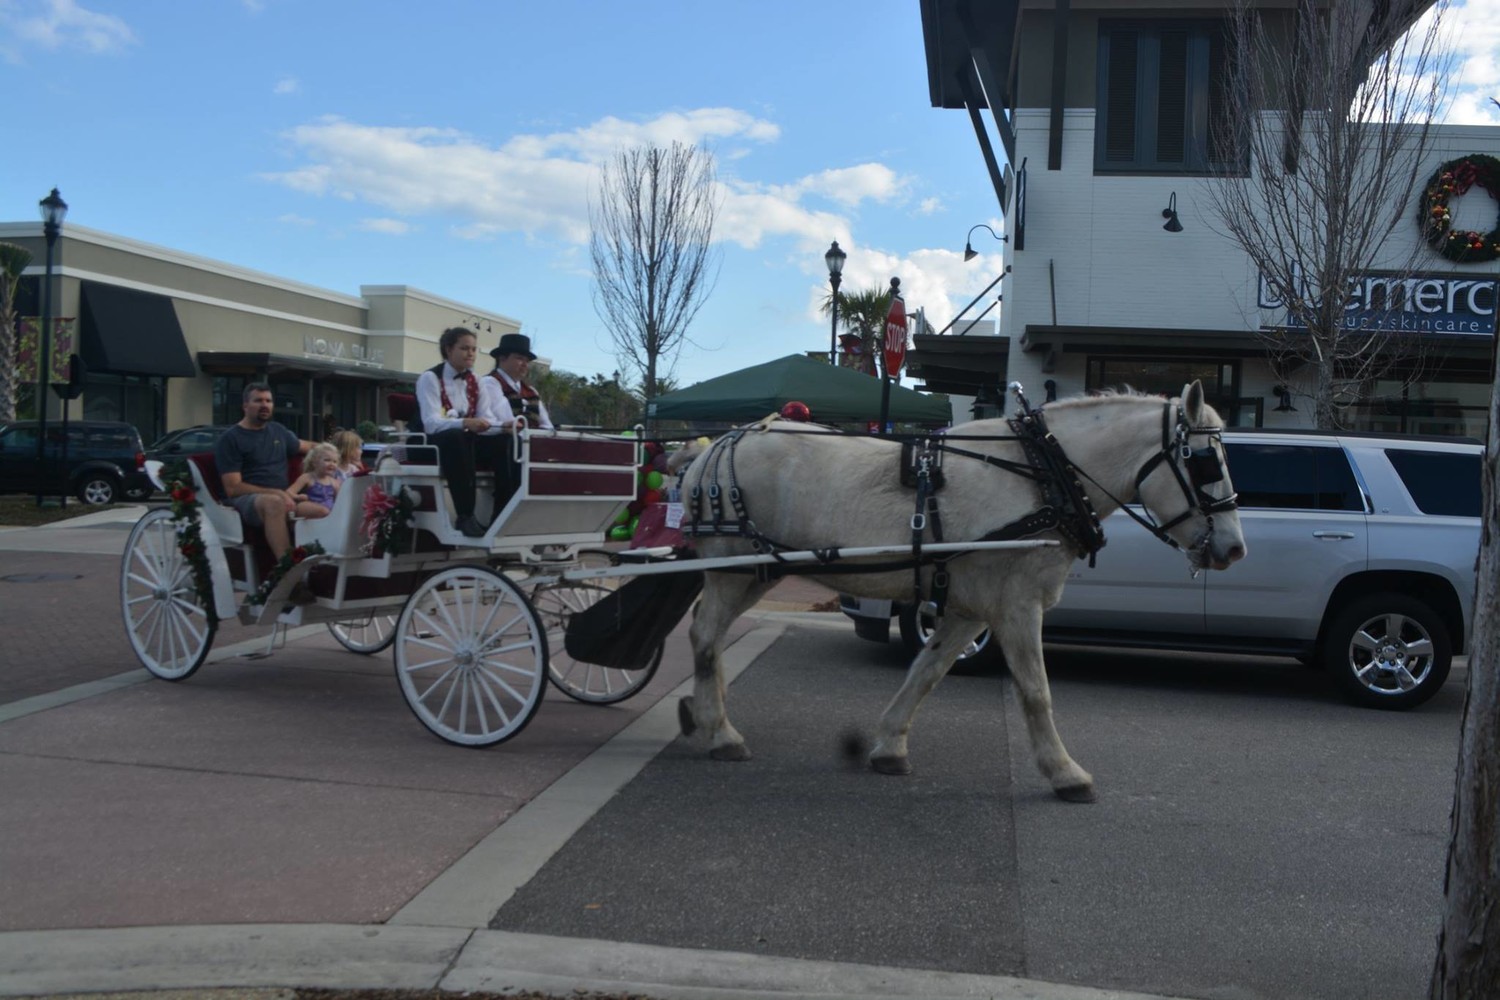 A horse-drawn carriage rolls down the street at Sawgrass Village.